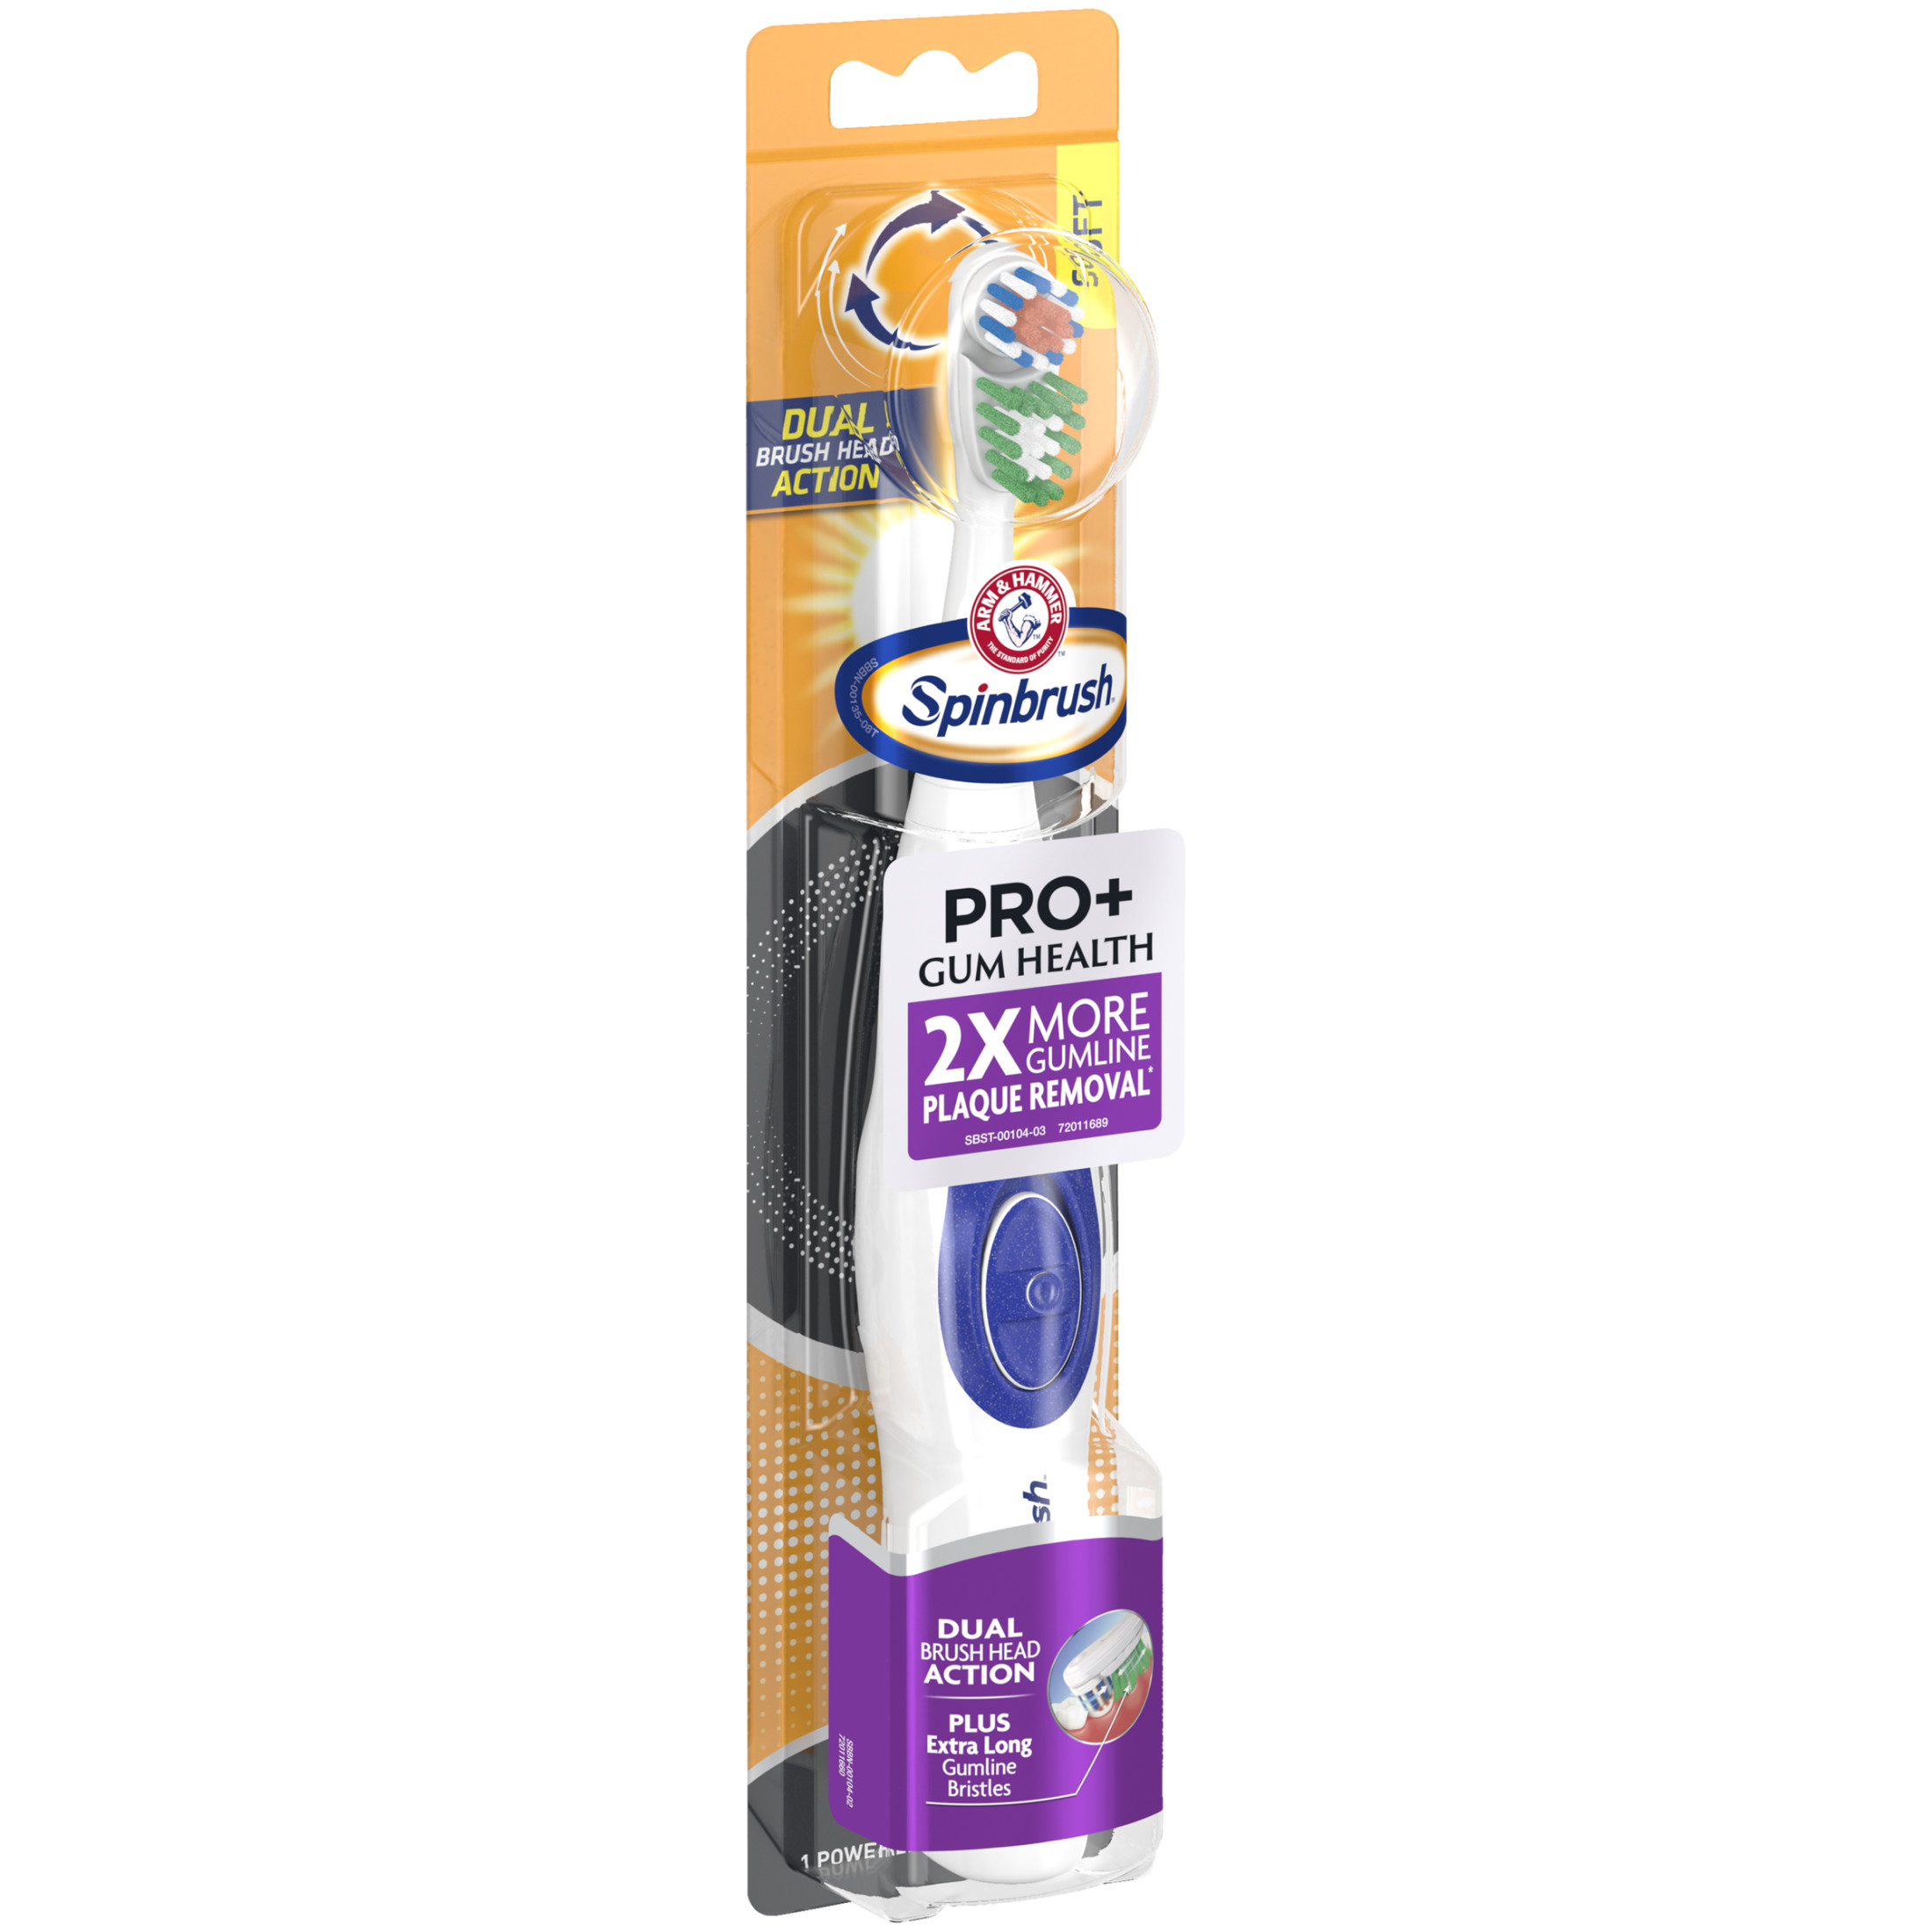 Spinbrush PRO+ Gum Health Battery Powered Toothbrush for Adults, Helps Plaque Removal, Soft Bristles - image 3 of 9